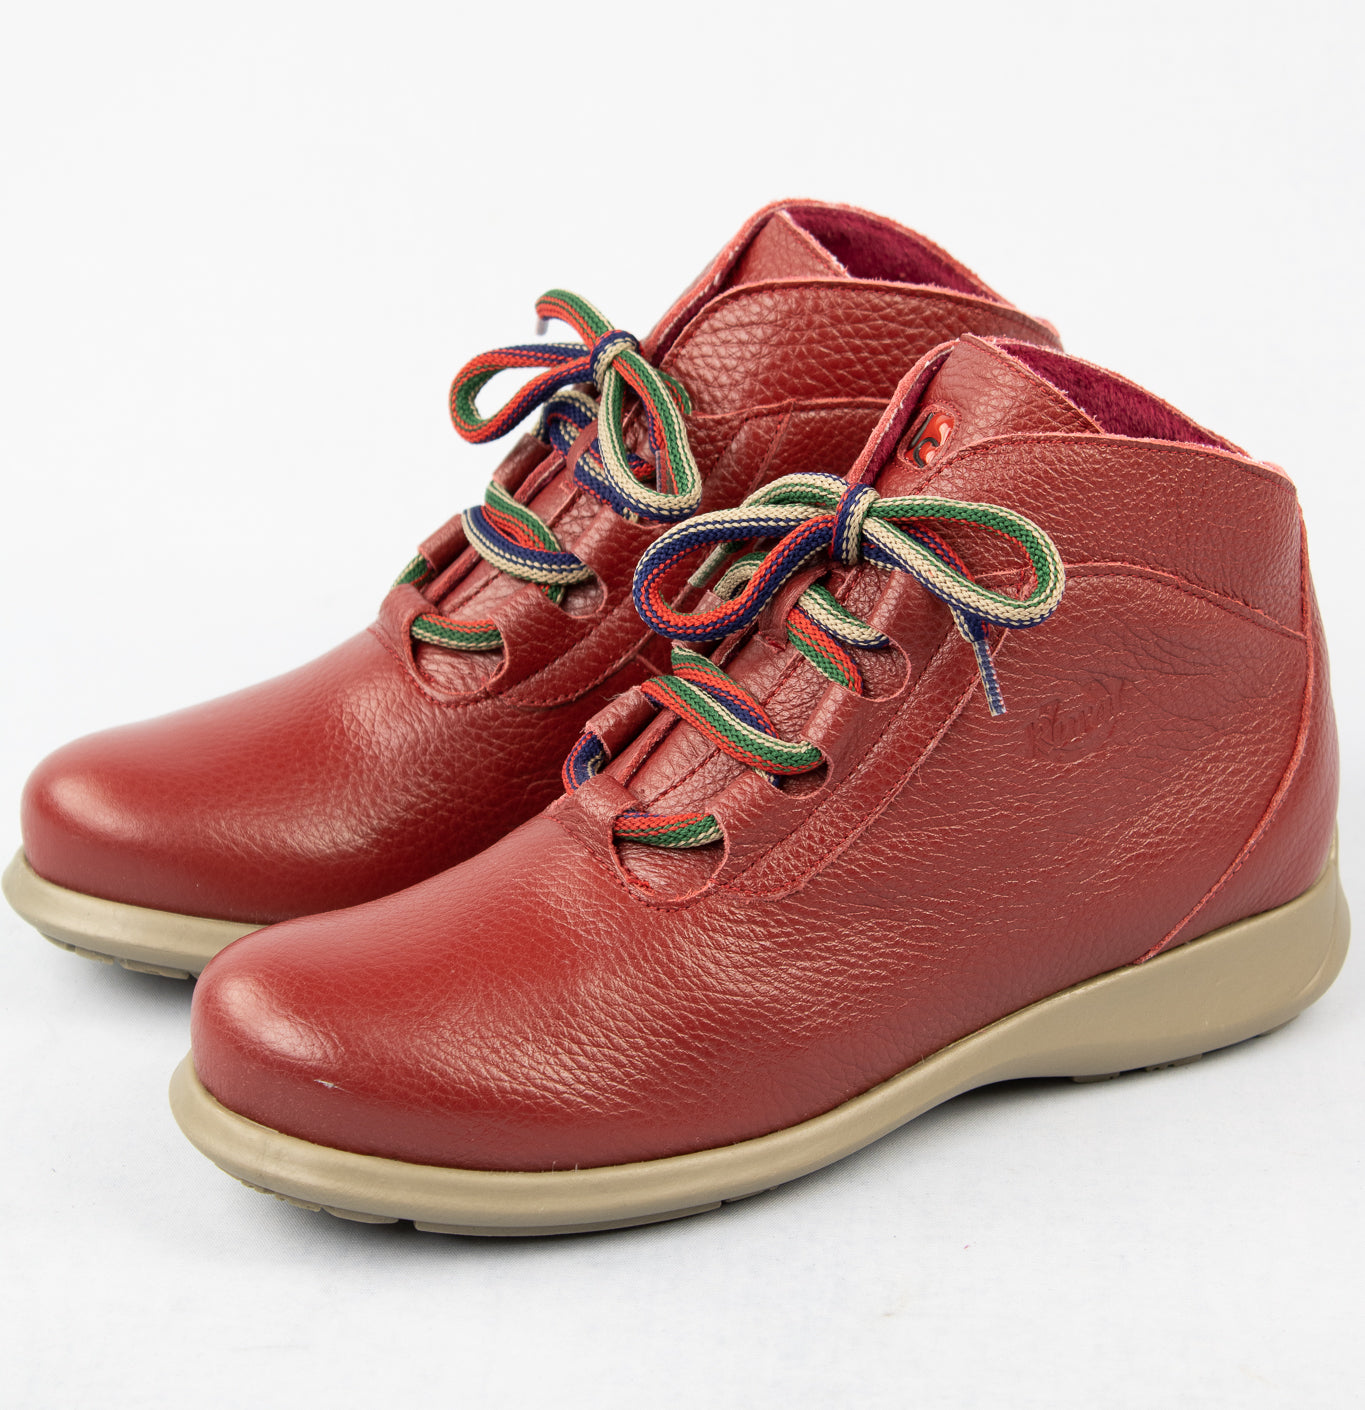 Jose Saenz 2082 Teja Red | Rural Walking Boots with Ergonomic Sole & Antibacterial Lining